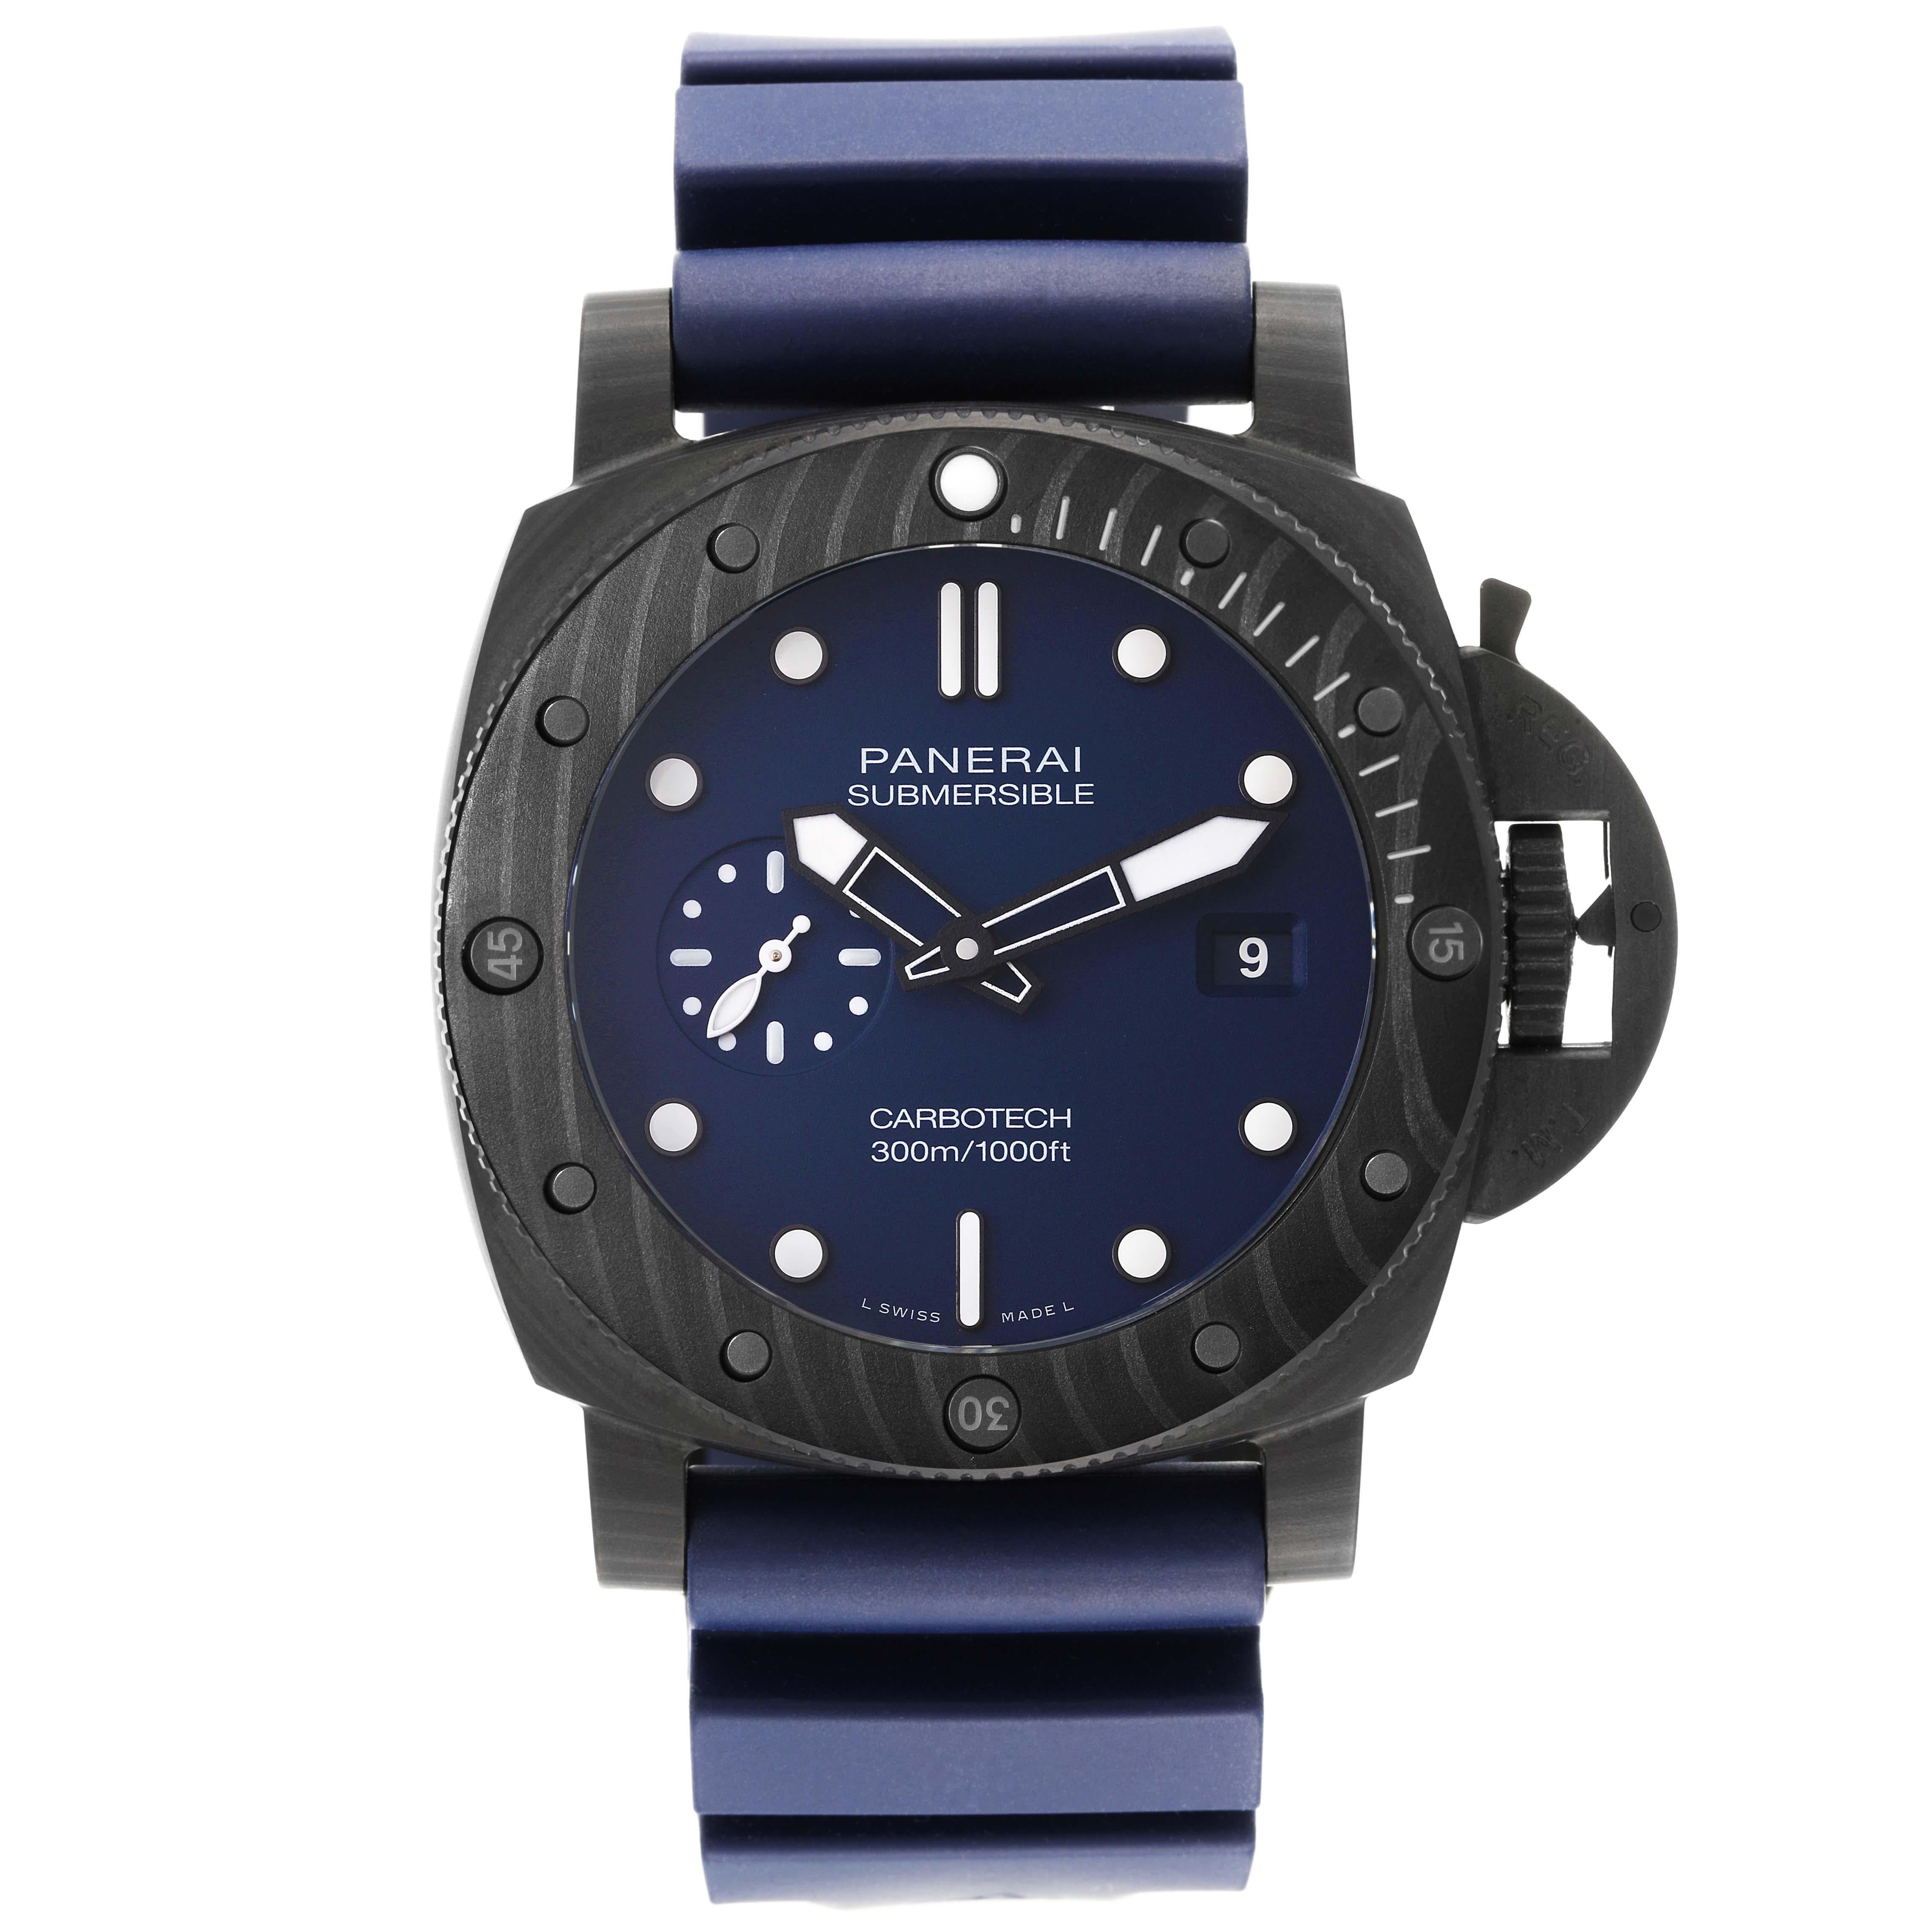 Panerai Submersible QuarantaQuattro Carbotech Mens Watch PAM01232 Unworn. Automatic self-winding movement. Black Carbotech carbon fiber composite cushion case 44.0 mm in diameter. Panerai patented crown protector. Black Carbotech uni-directional